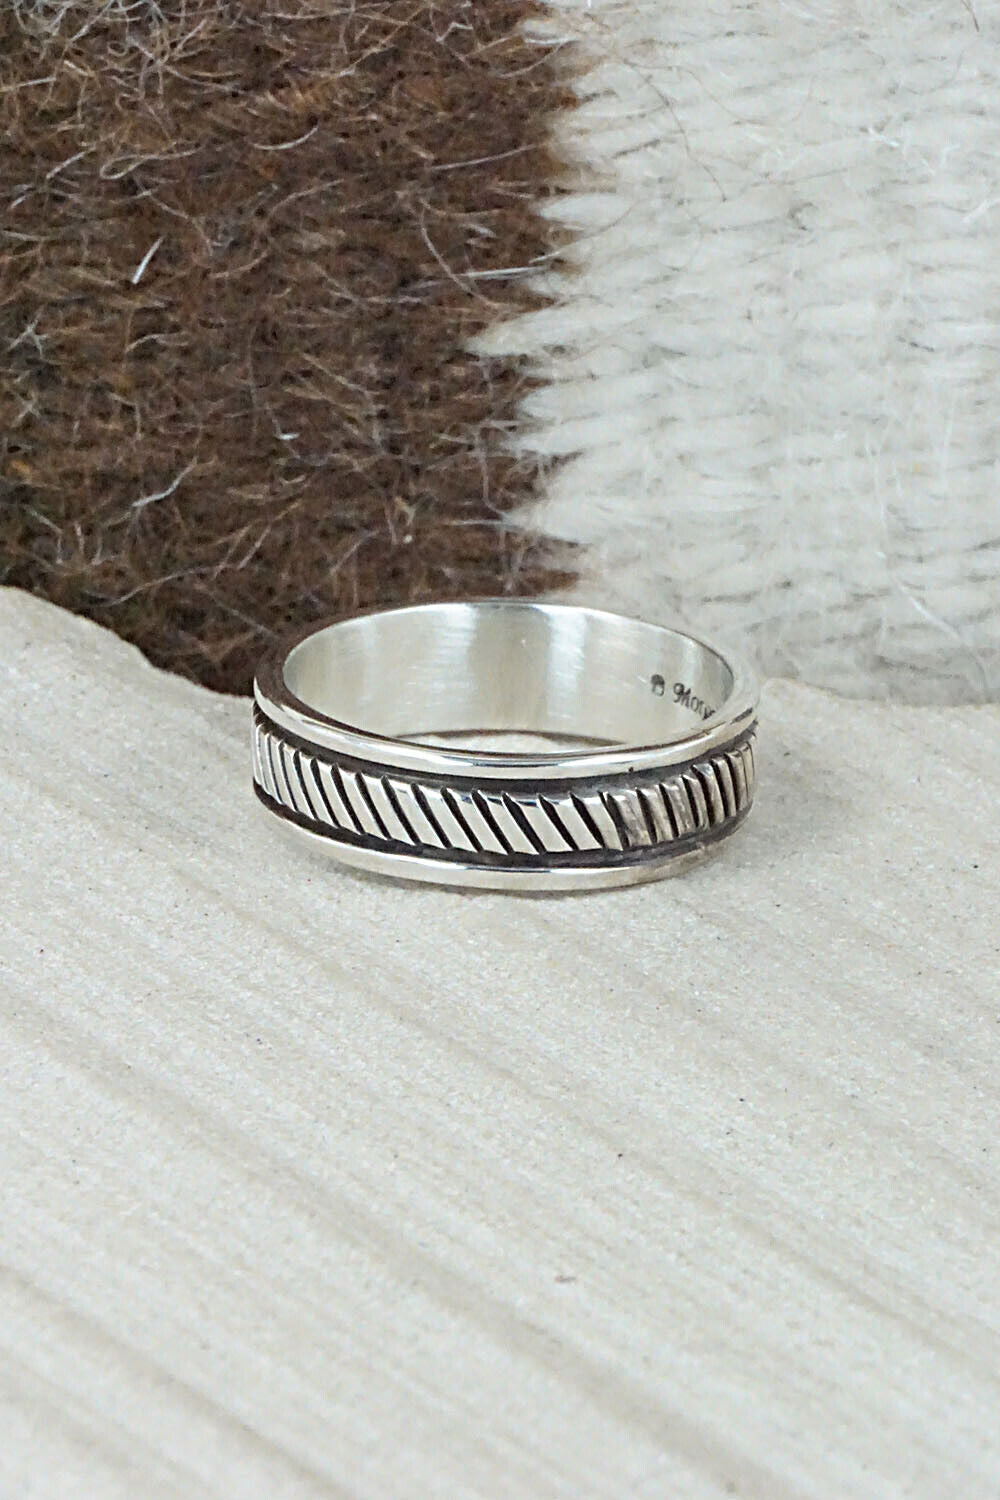 Sterling Silver Ring - Bruce Morgan - Size 11.25